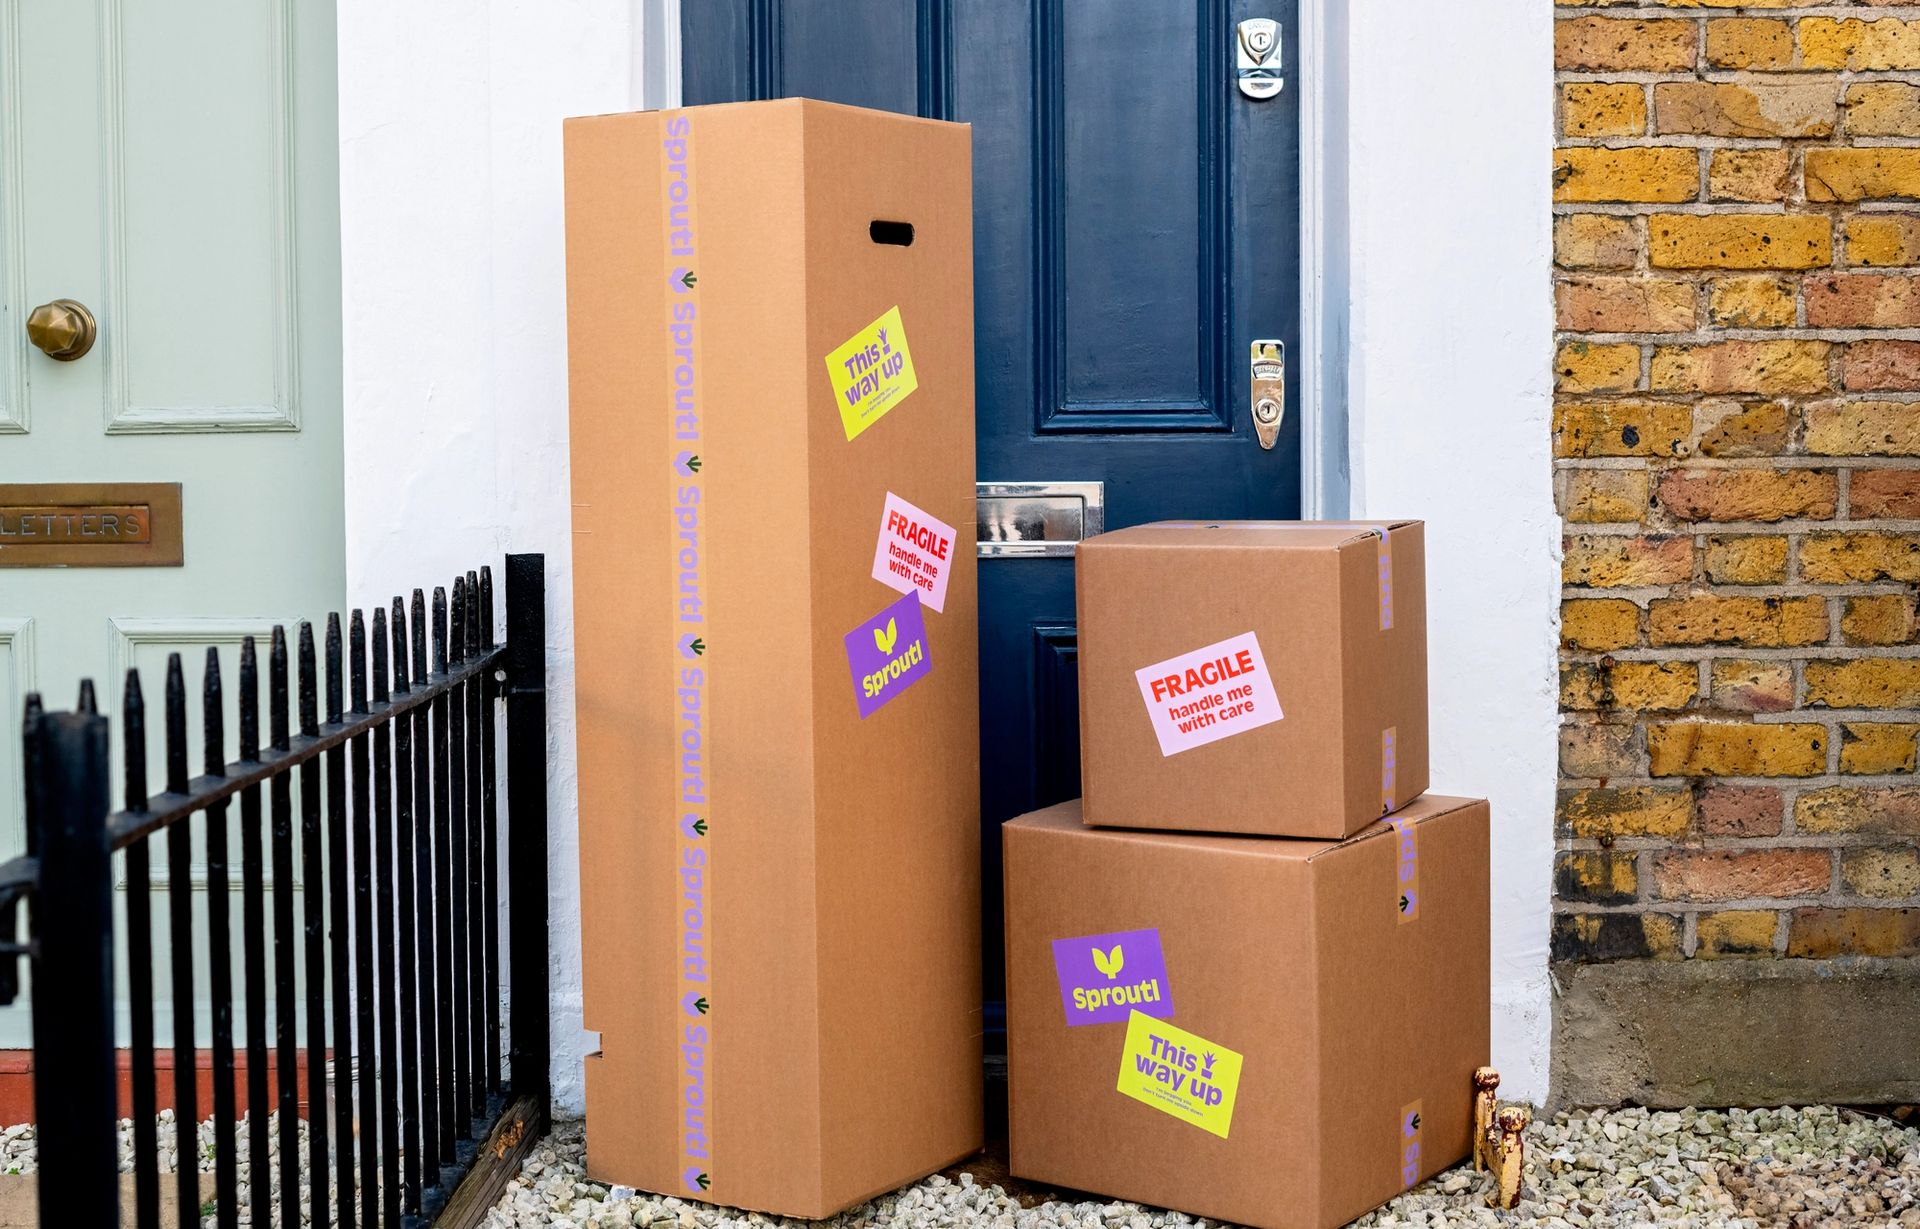 Pile of cardboard boxes outside a blue front door